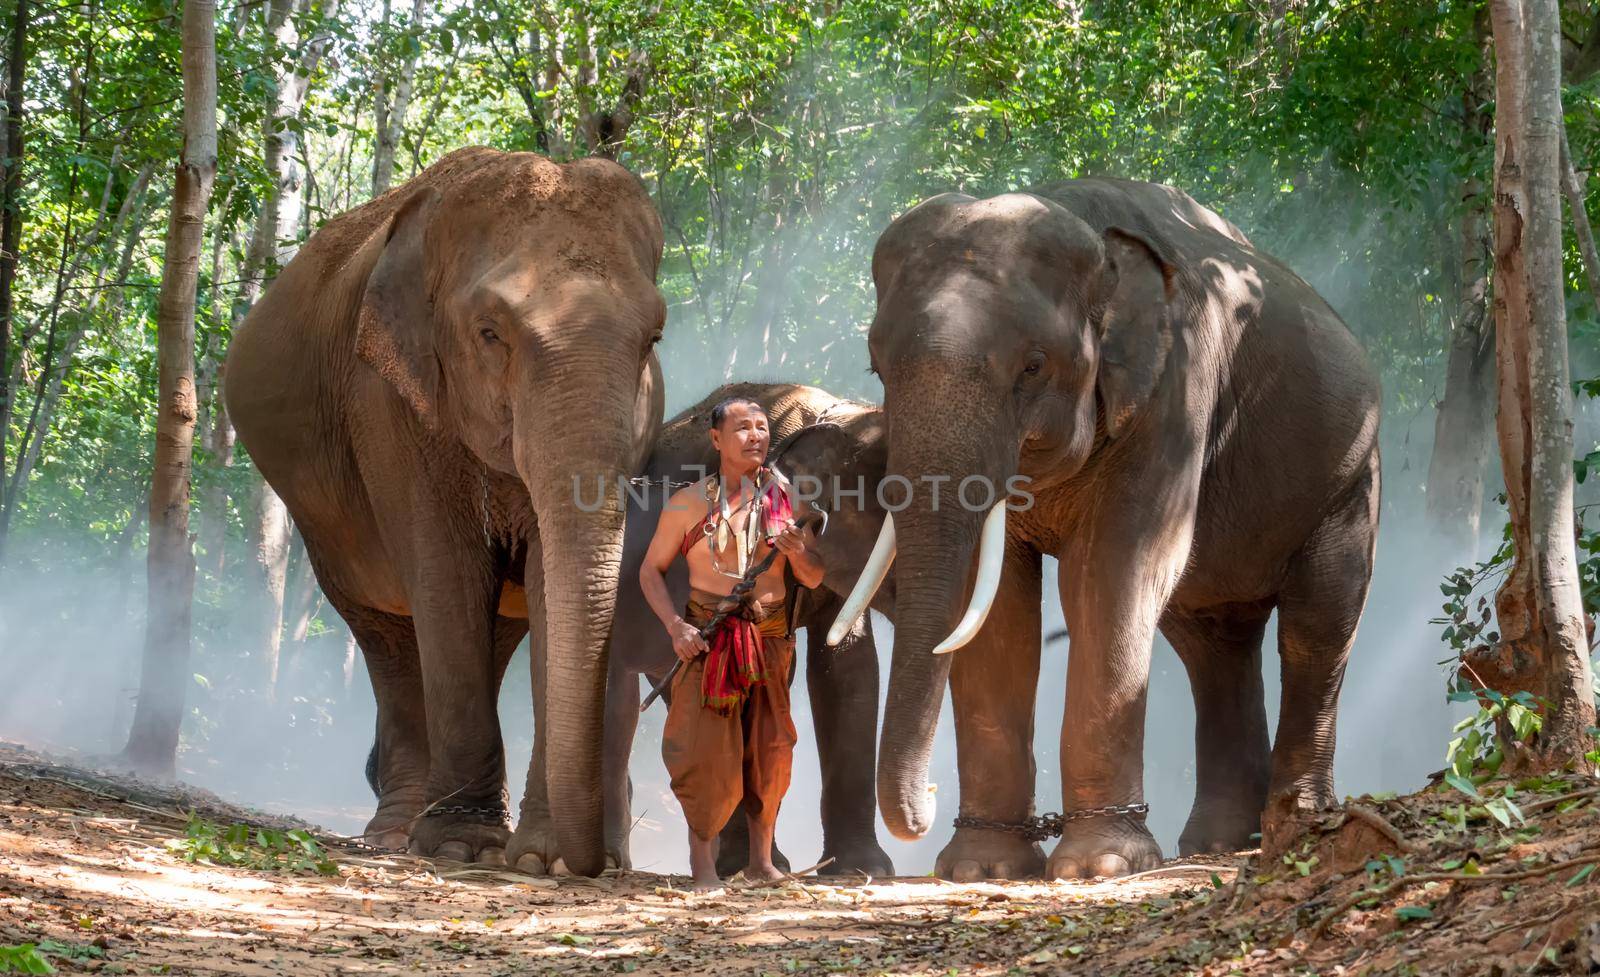 An elephant mahout and elephant walking through the haze in the jungle. Lifestyle of surin elephants village. by chuanchai